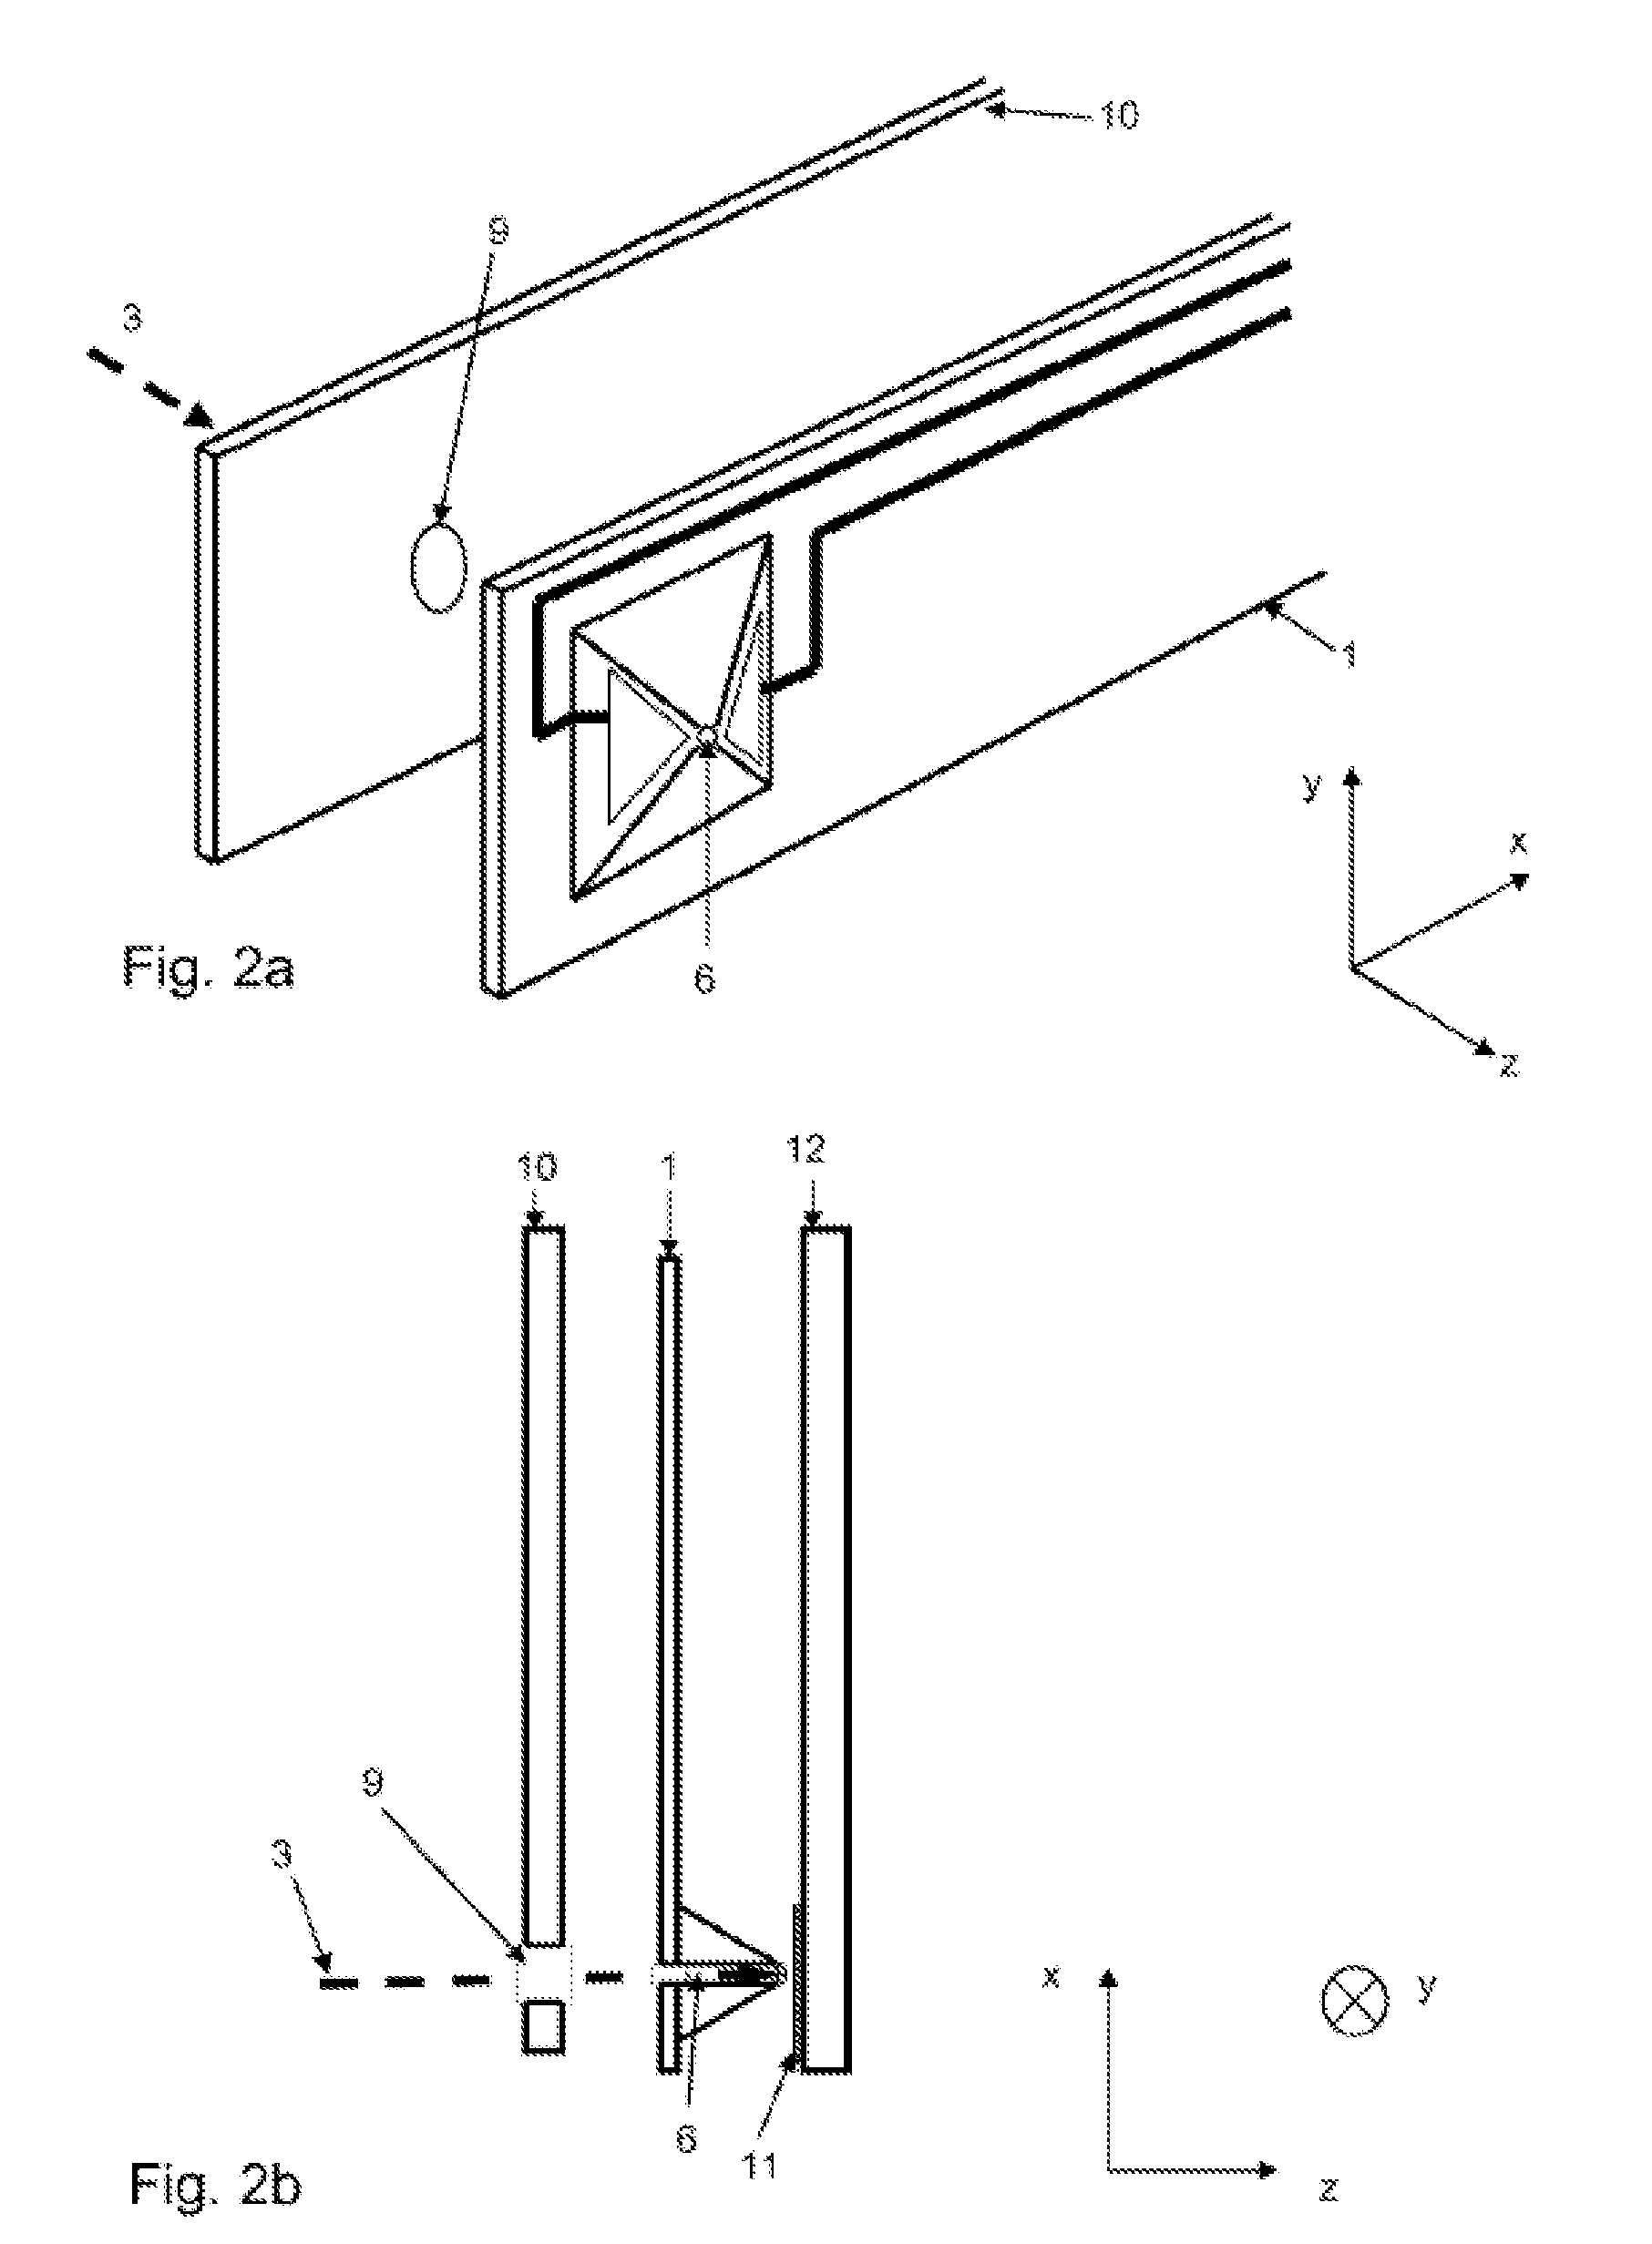 Device and method for an atomic force microscope for the study and modification of surface properties